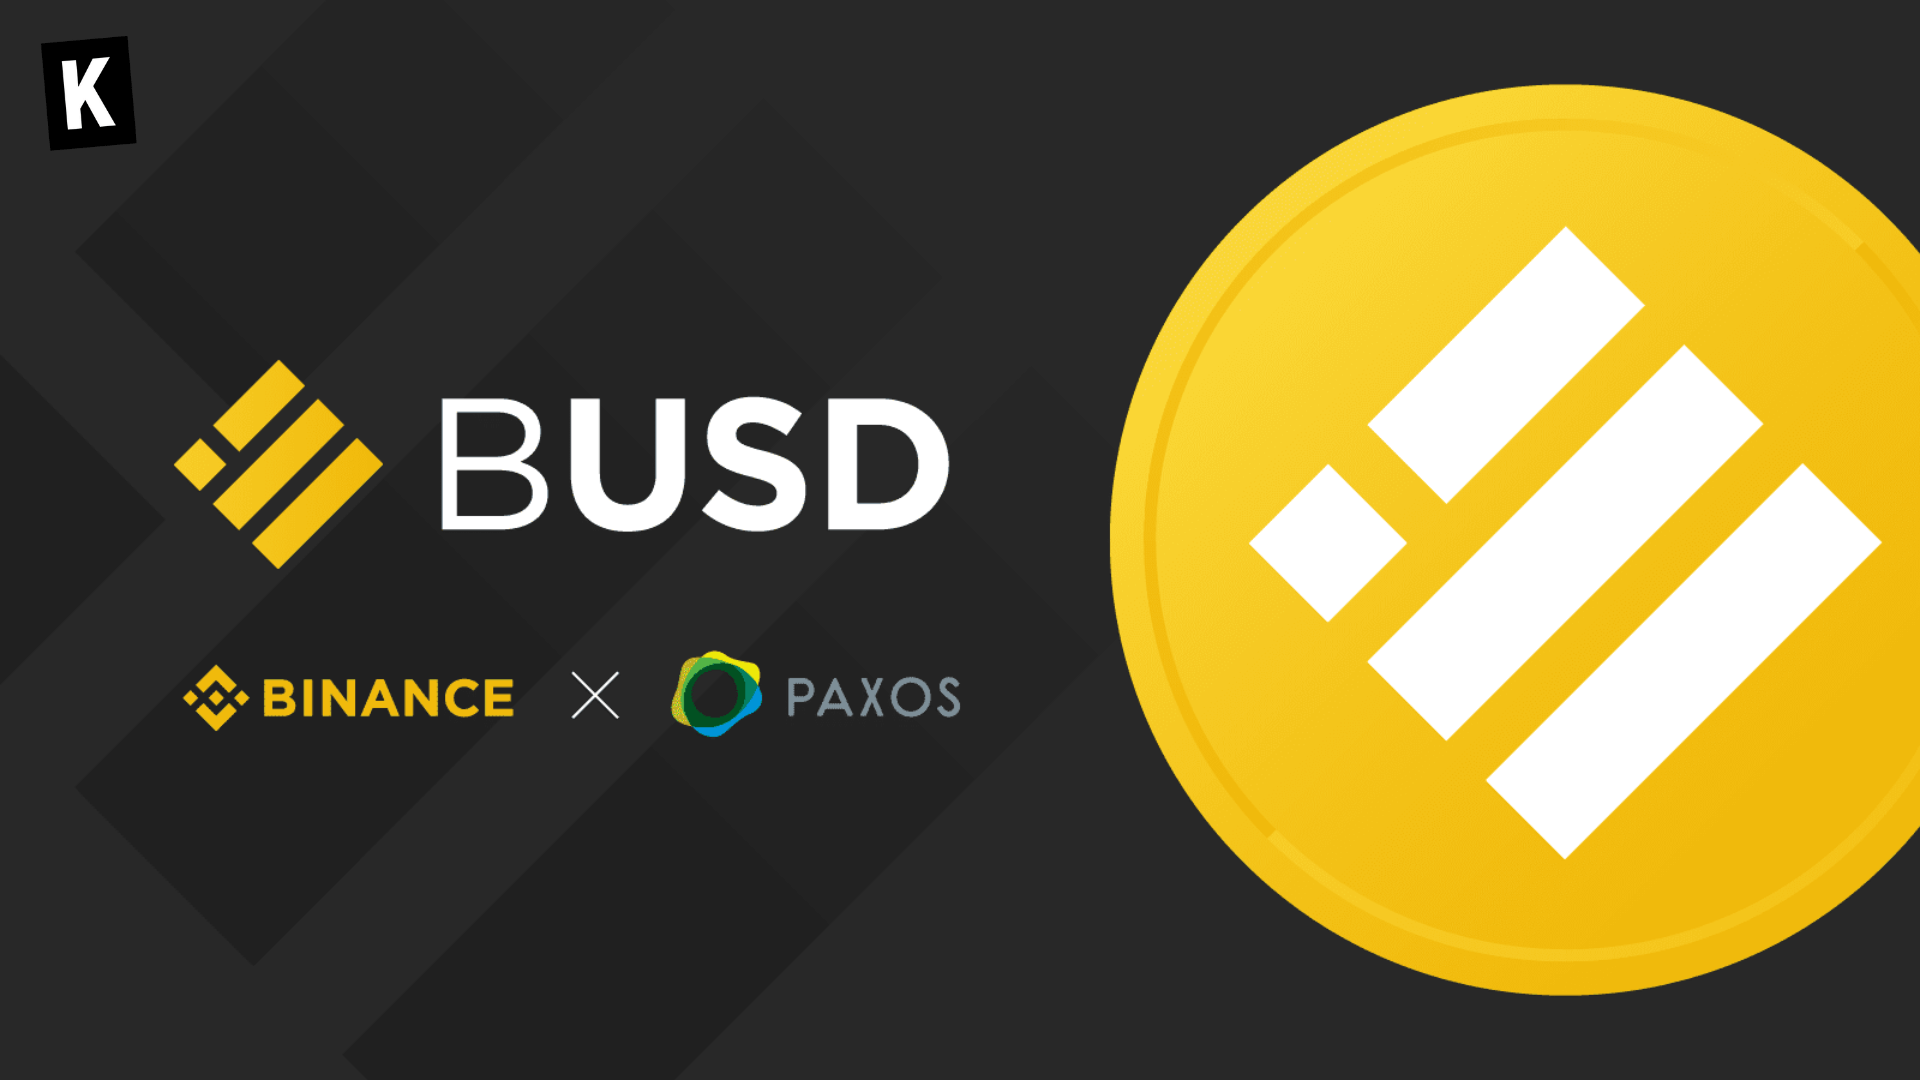 Binance puts some distance with BUSD and Paxos